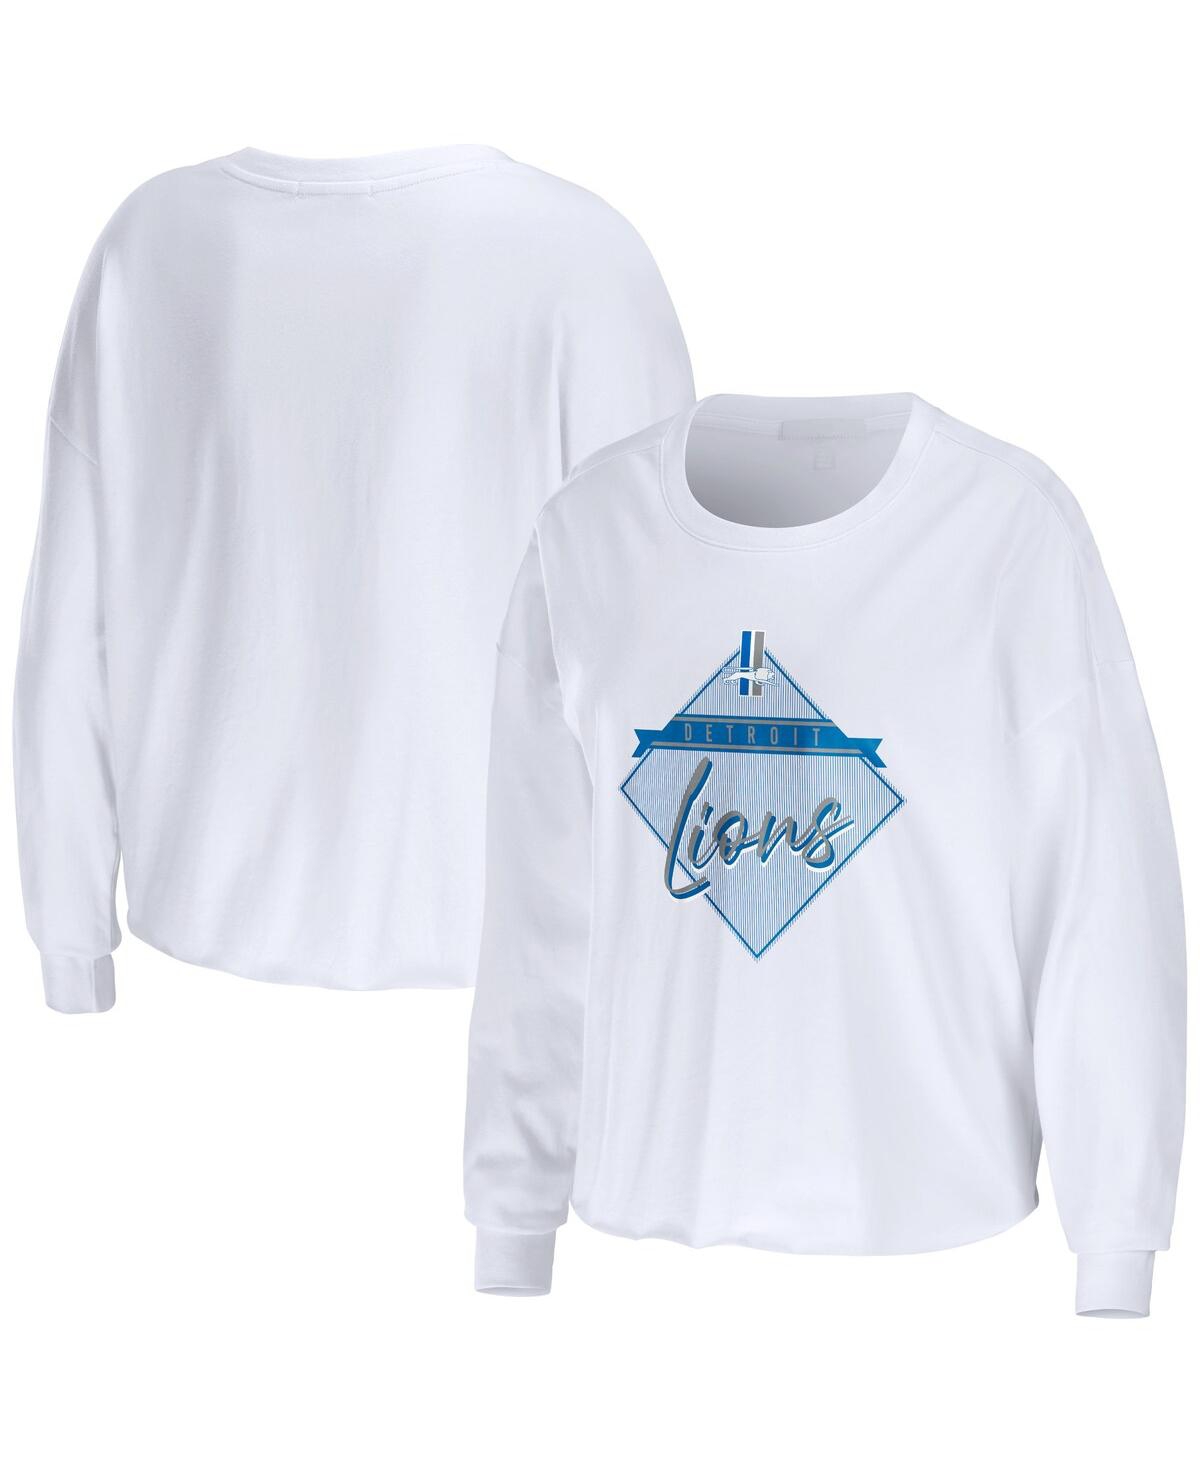 WEAR BY ERIN ANDREWS WOMEN'S WEAR BY ERIN ANDREWS WHITE DETROIT LIONS DOMESTIC CROPPED LONG SLEEVE T-SHIRT